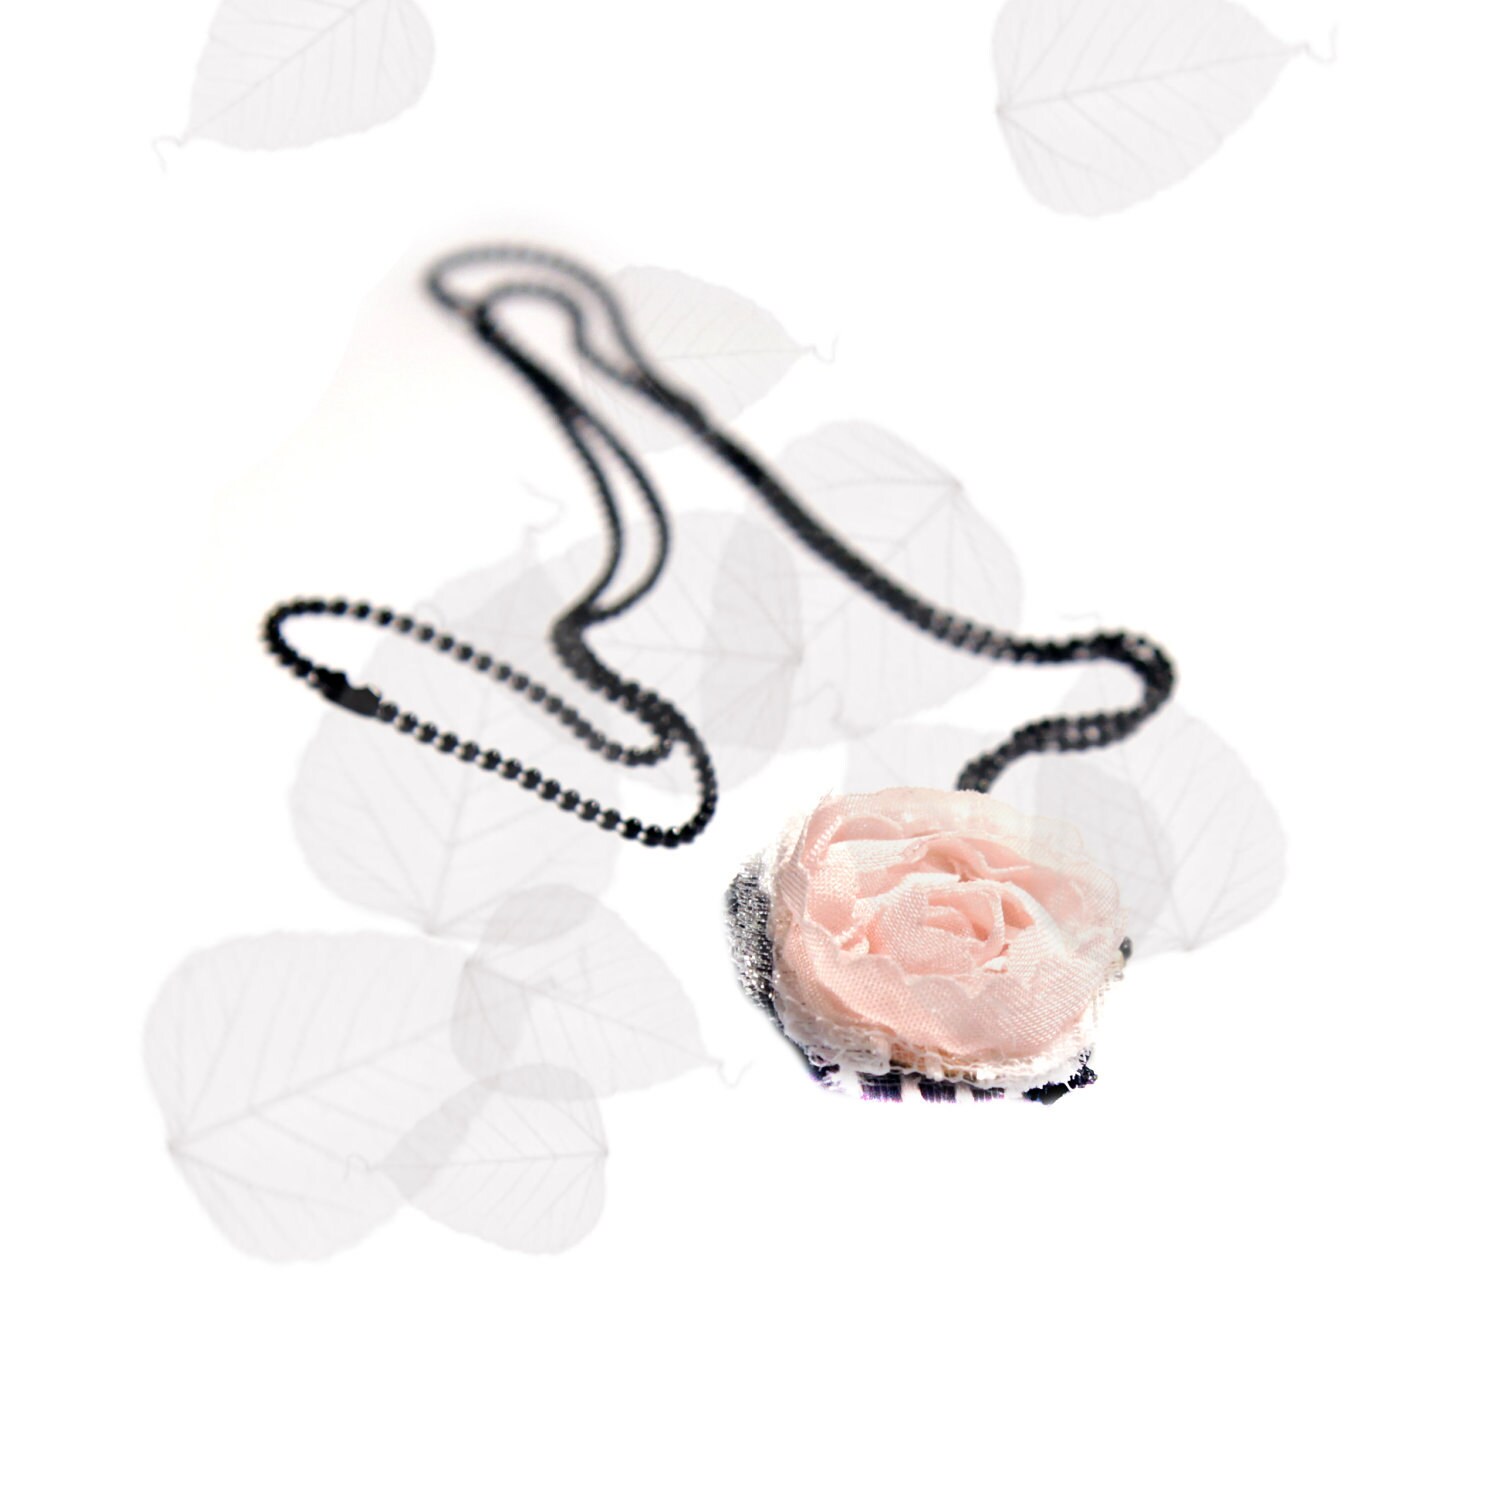 Suri inspired 30mm double sided black and pink rose charm necklace on 24'' 1.5 mm black ball chain